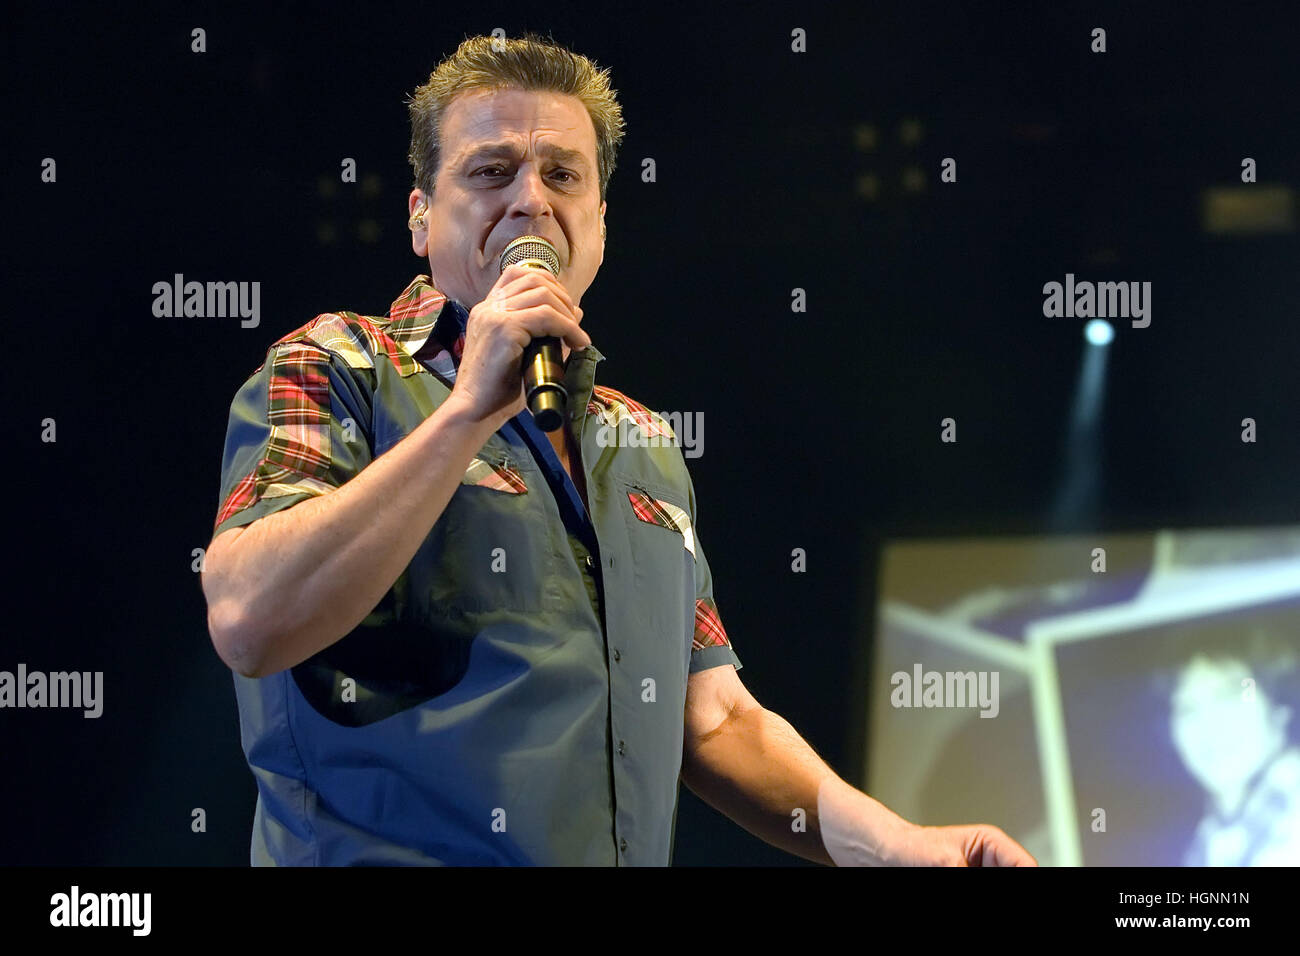 Les McKeown as the Bay City Rollers perform live on stage at the SSE Hydro at the SECC in Glasgow. KAMINSKI PHOTO - EXCLUSIVE IMAGES Bay City Rollers headlining at the SSE Hydro at the SECC in Glasgow on 11th December 2016    Must credit photo to Peter Ka Stock Photo